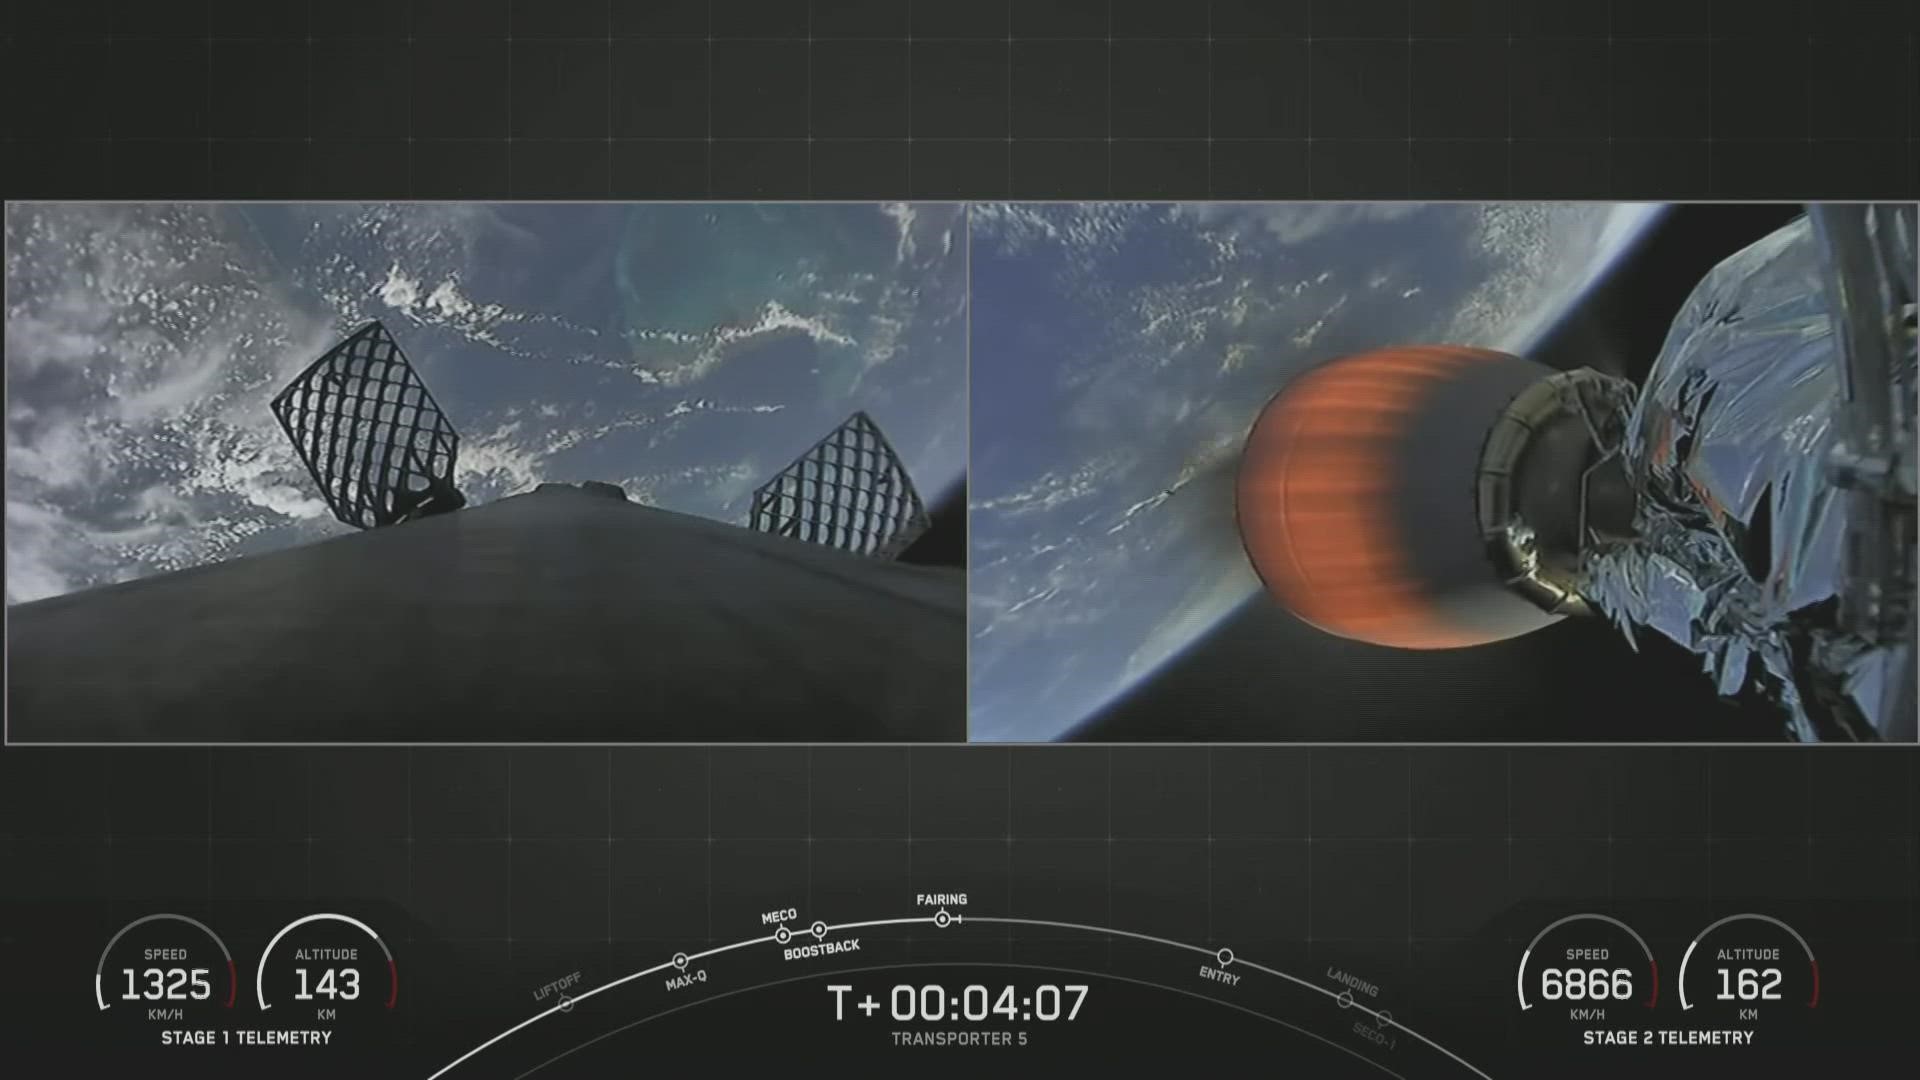 SpaceX Falcon 9 rocket launch the Transporter 5 mission carrying satellites for commercial and government customers.